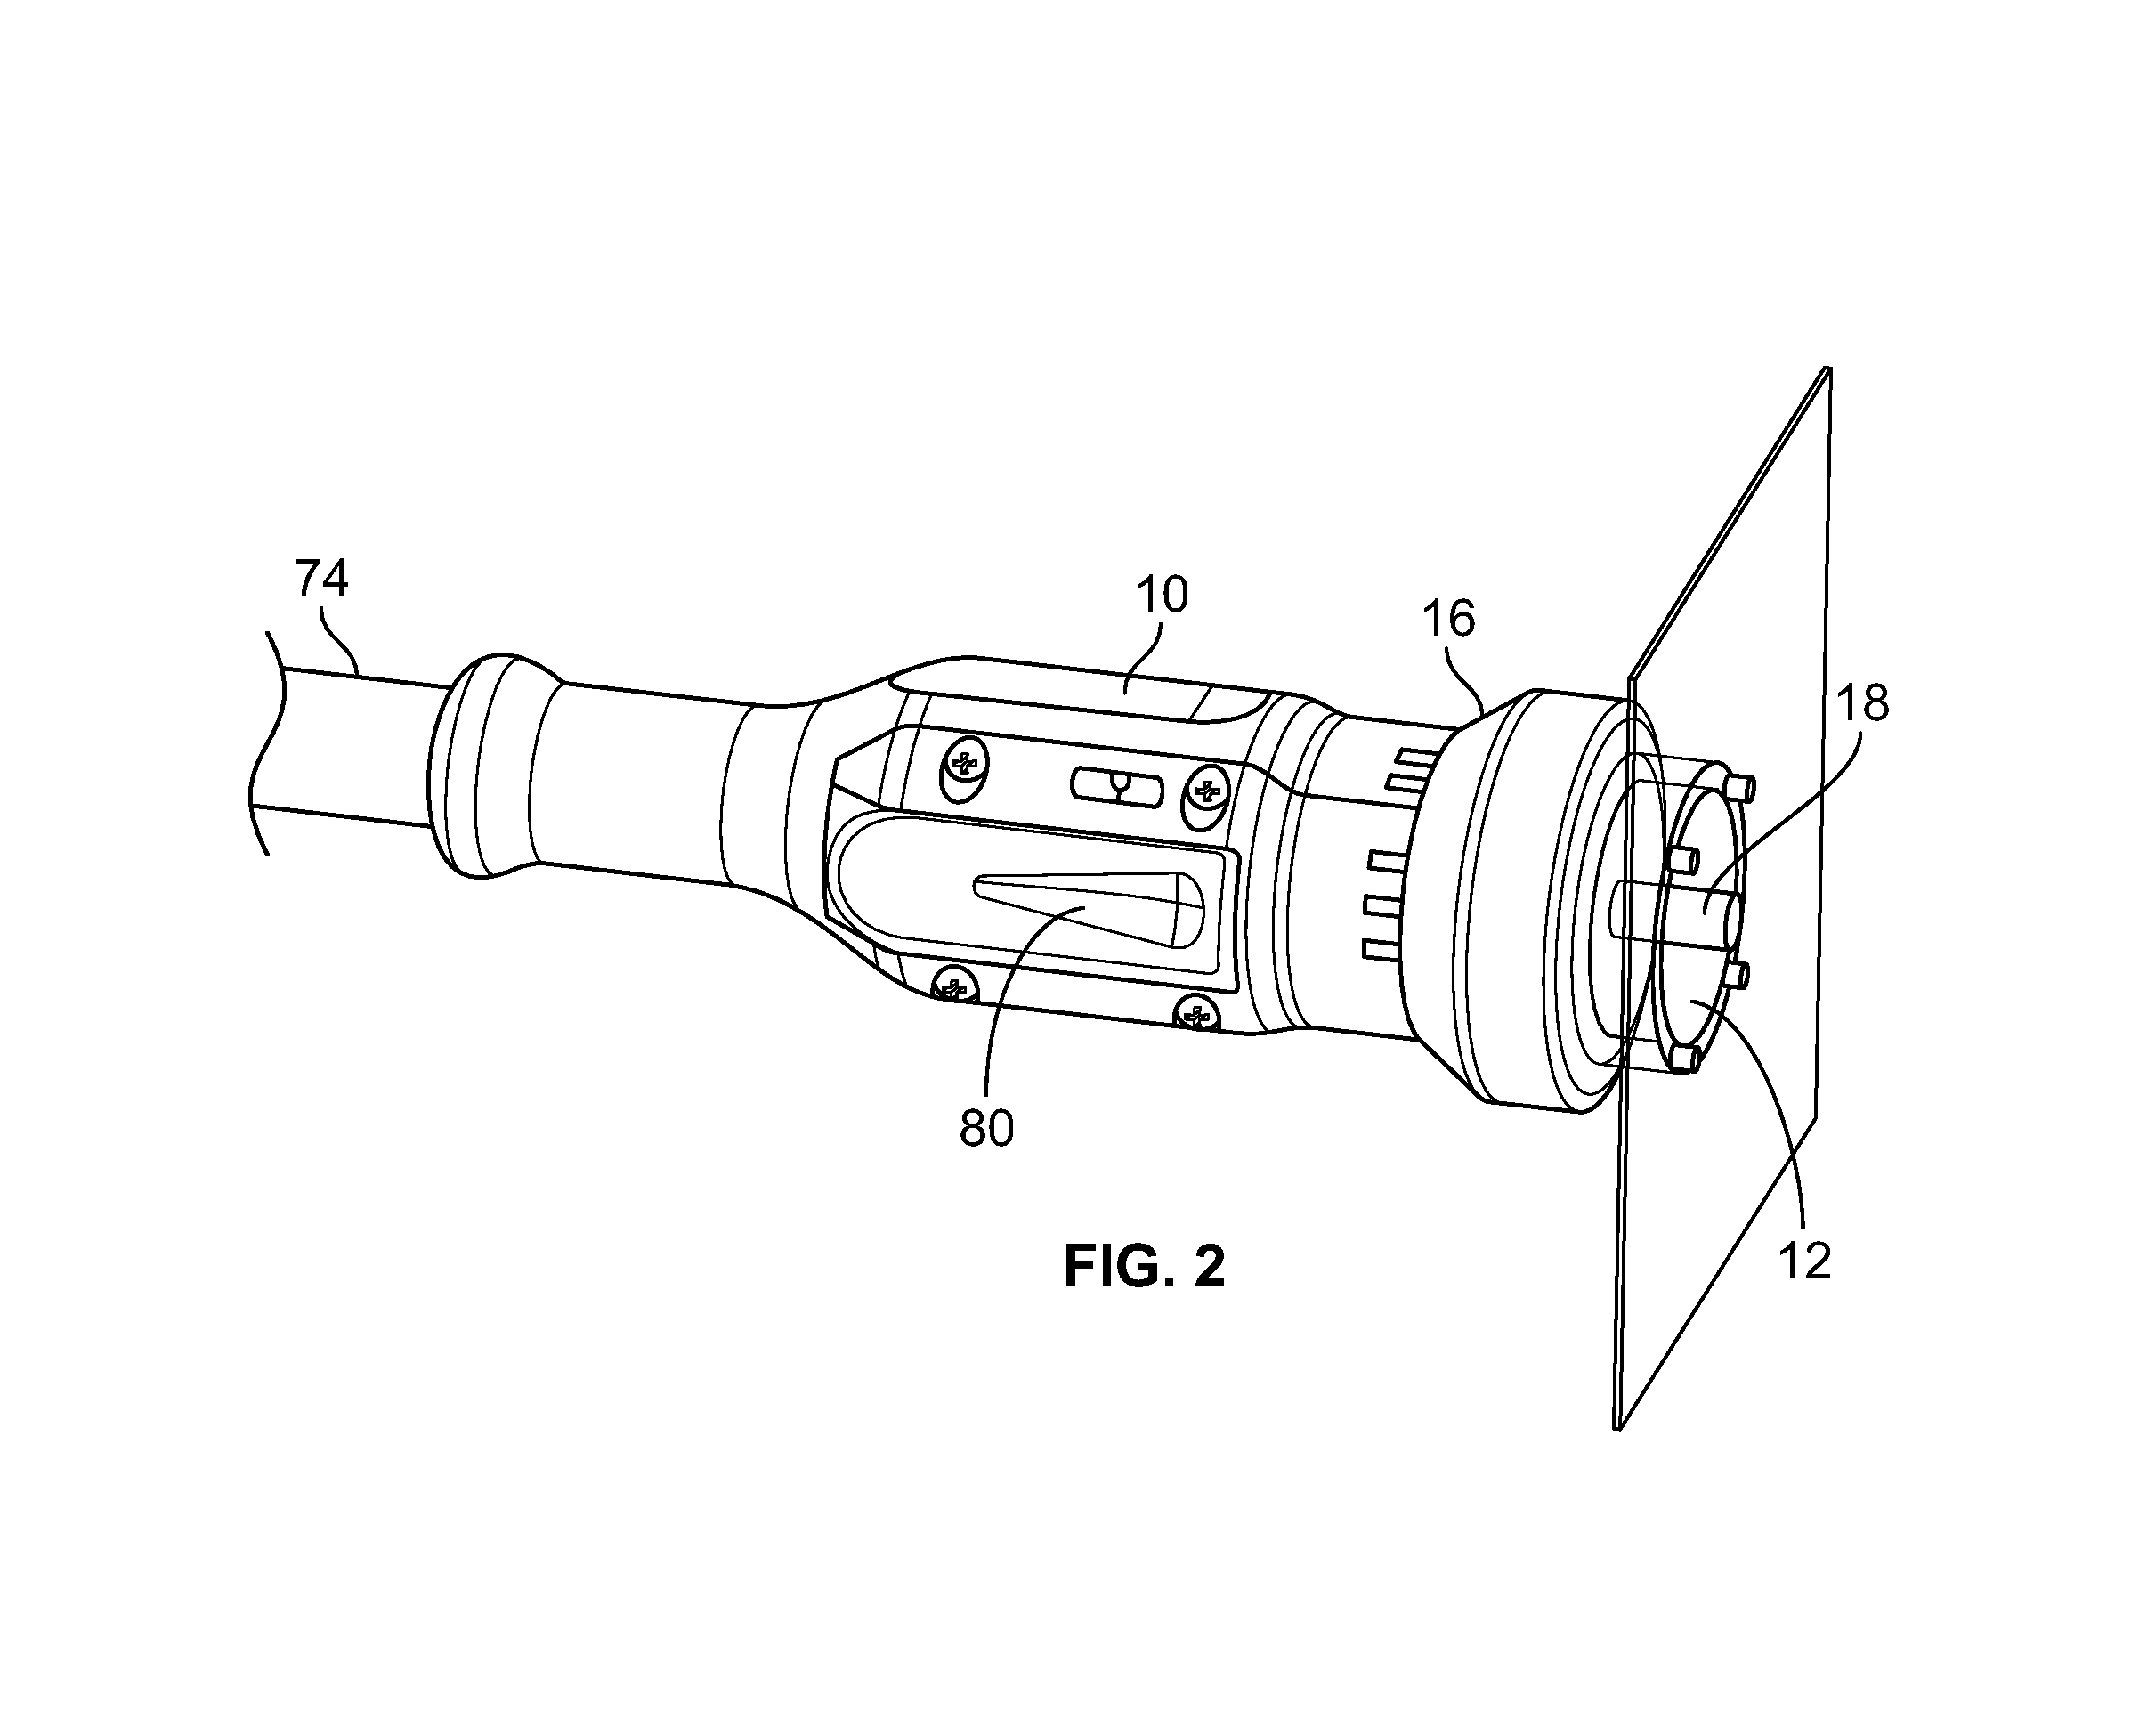 Device for targeted treatment of dermatoses